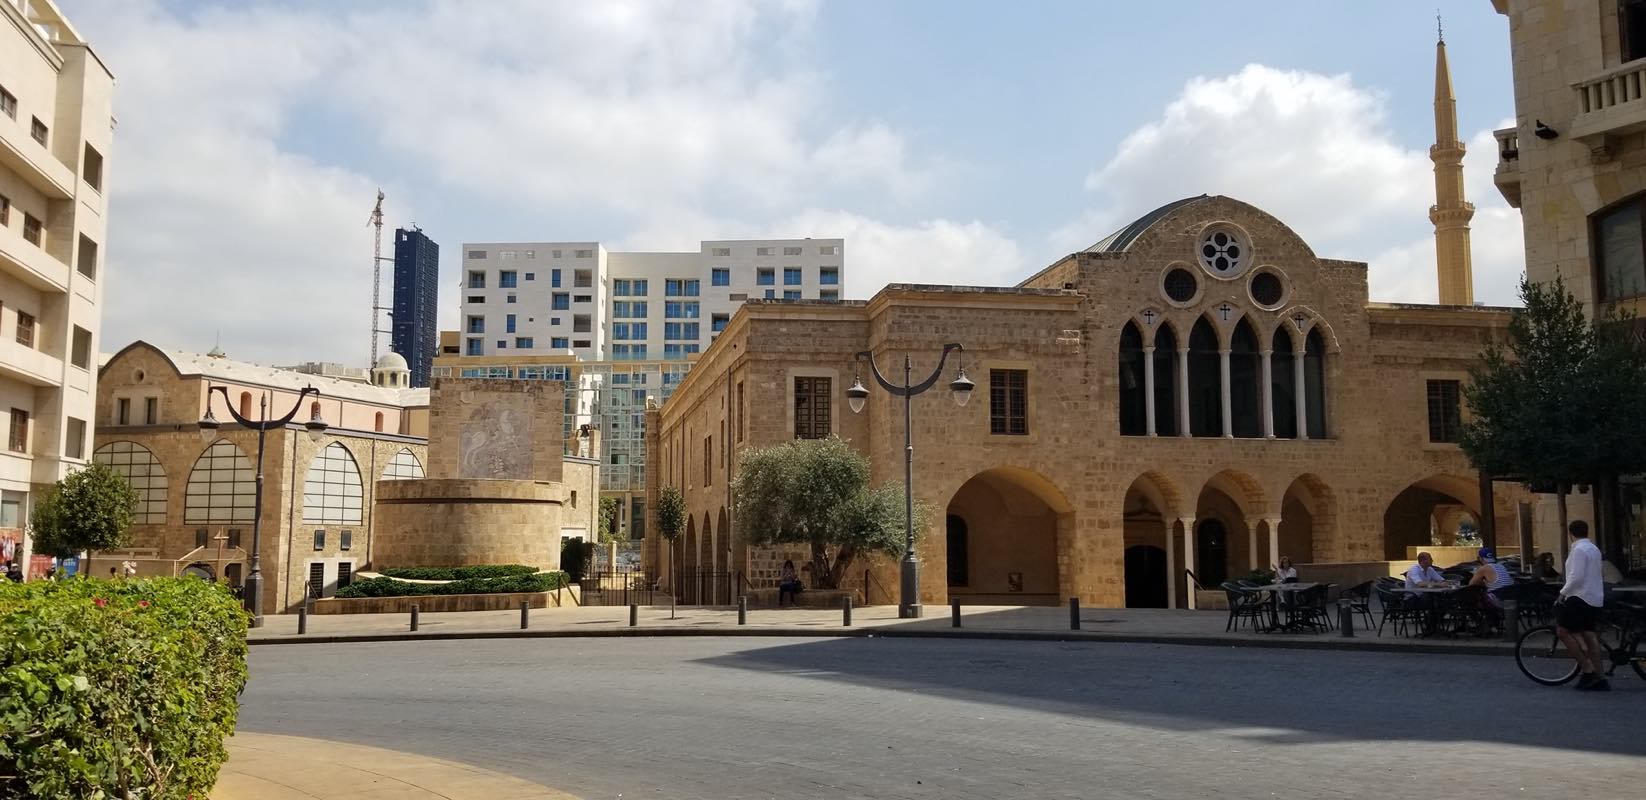 View from square toward St. George's Greek Orthodox Cathedral.